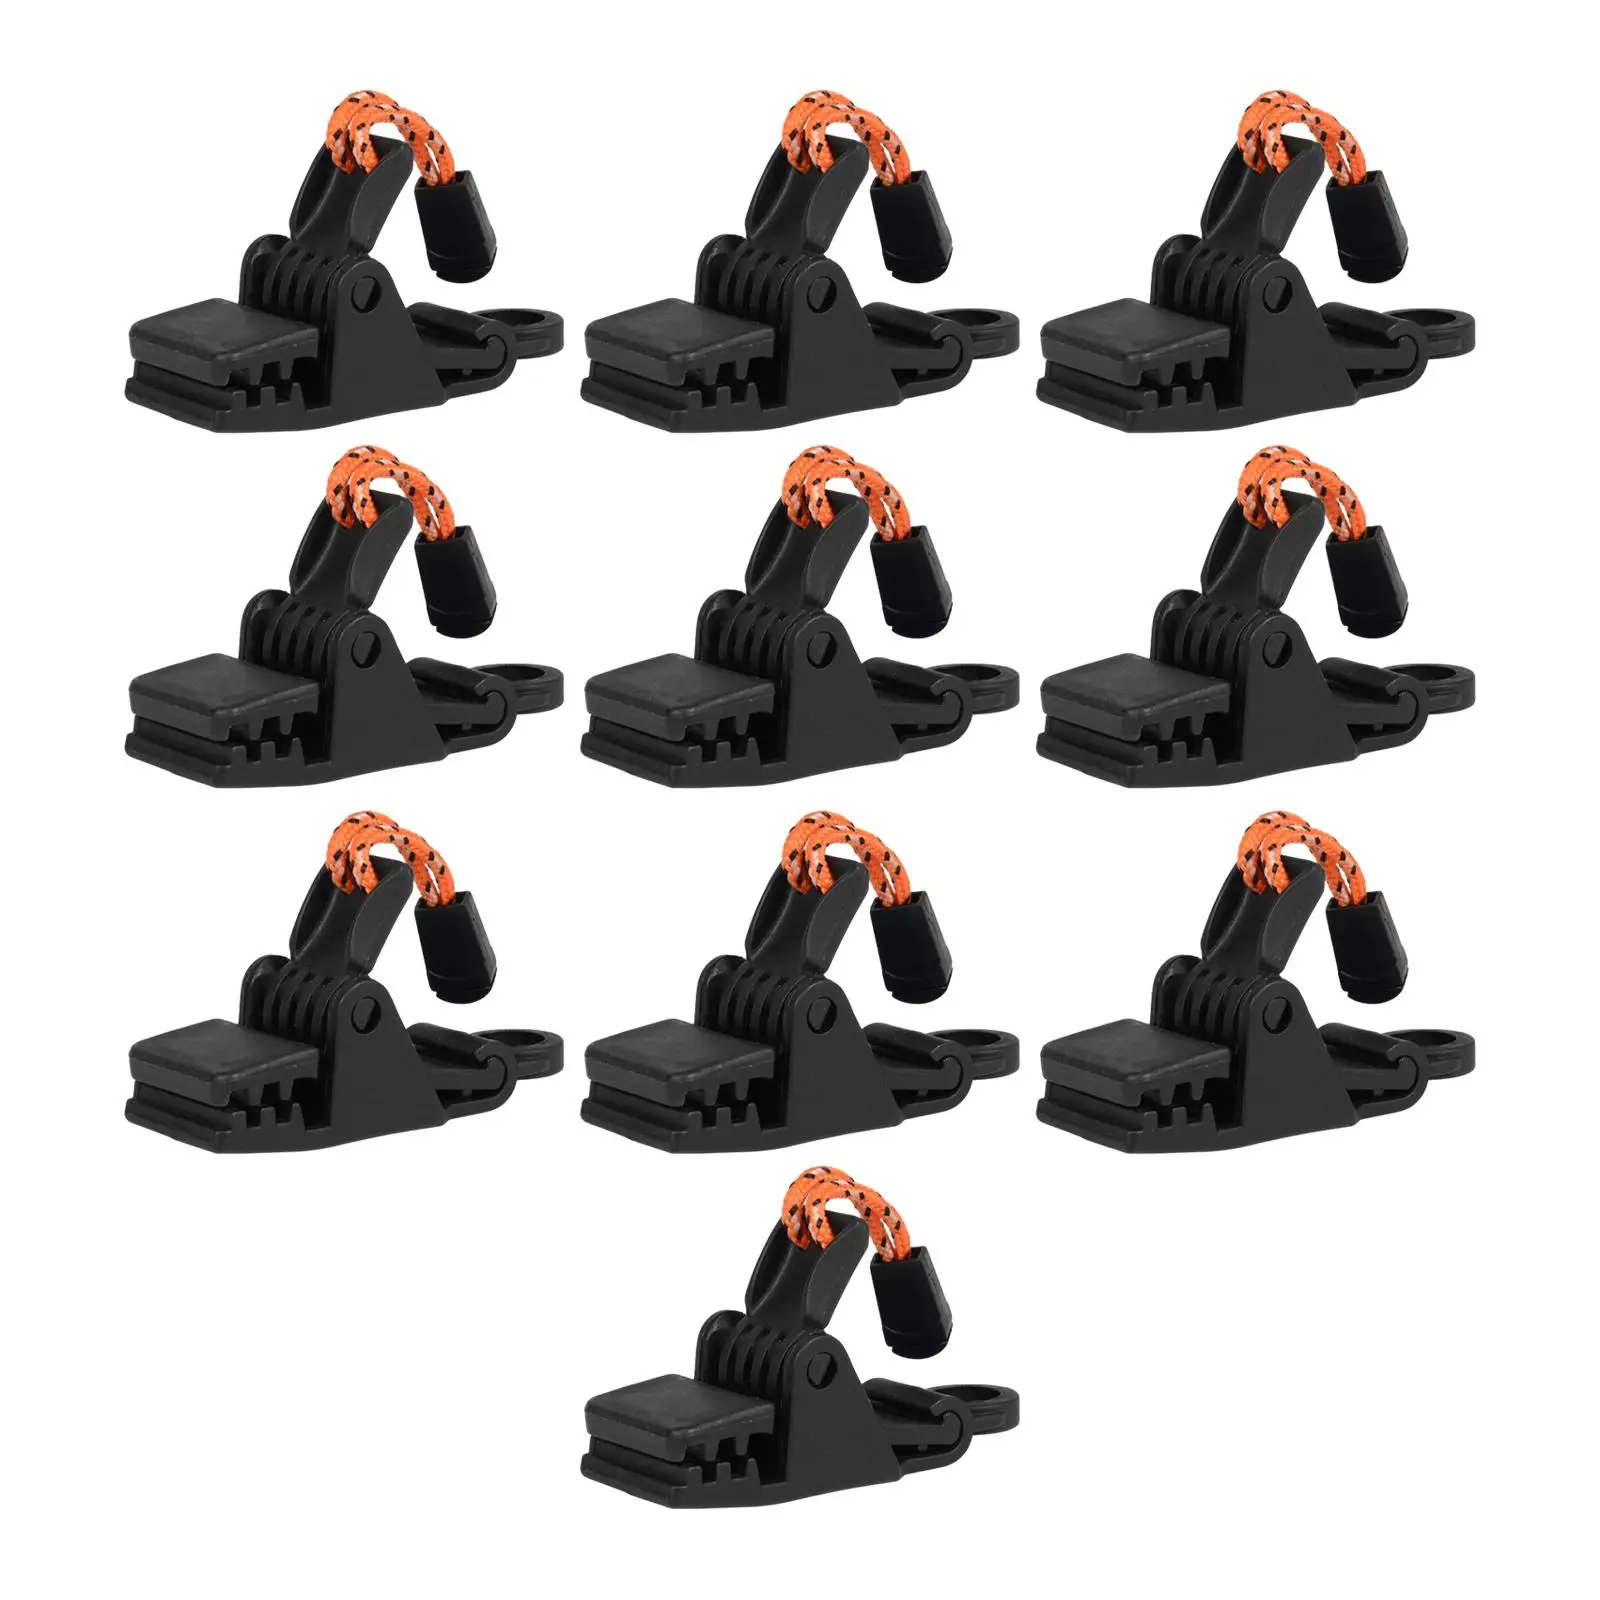 10x Tarp Clips Heavy Duty Sturdy Portable Lightweight Lock Grip Clamps for Outdoor Canopies Car Covers Shade Cloth Backpacking